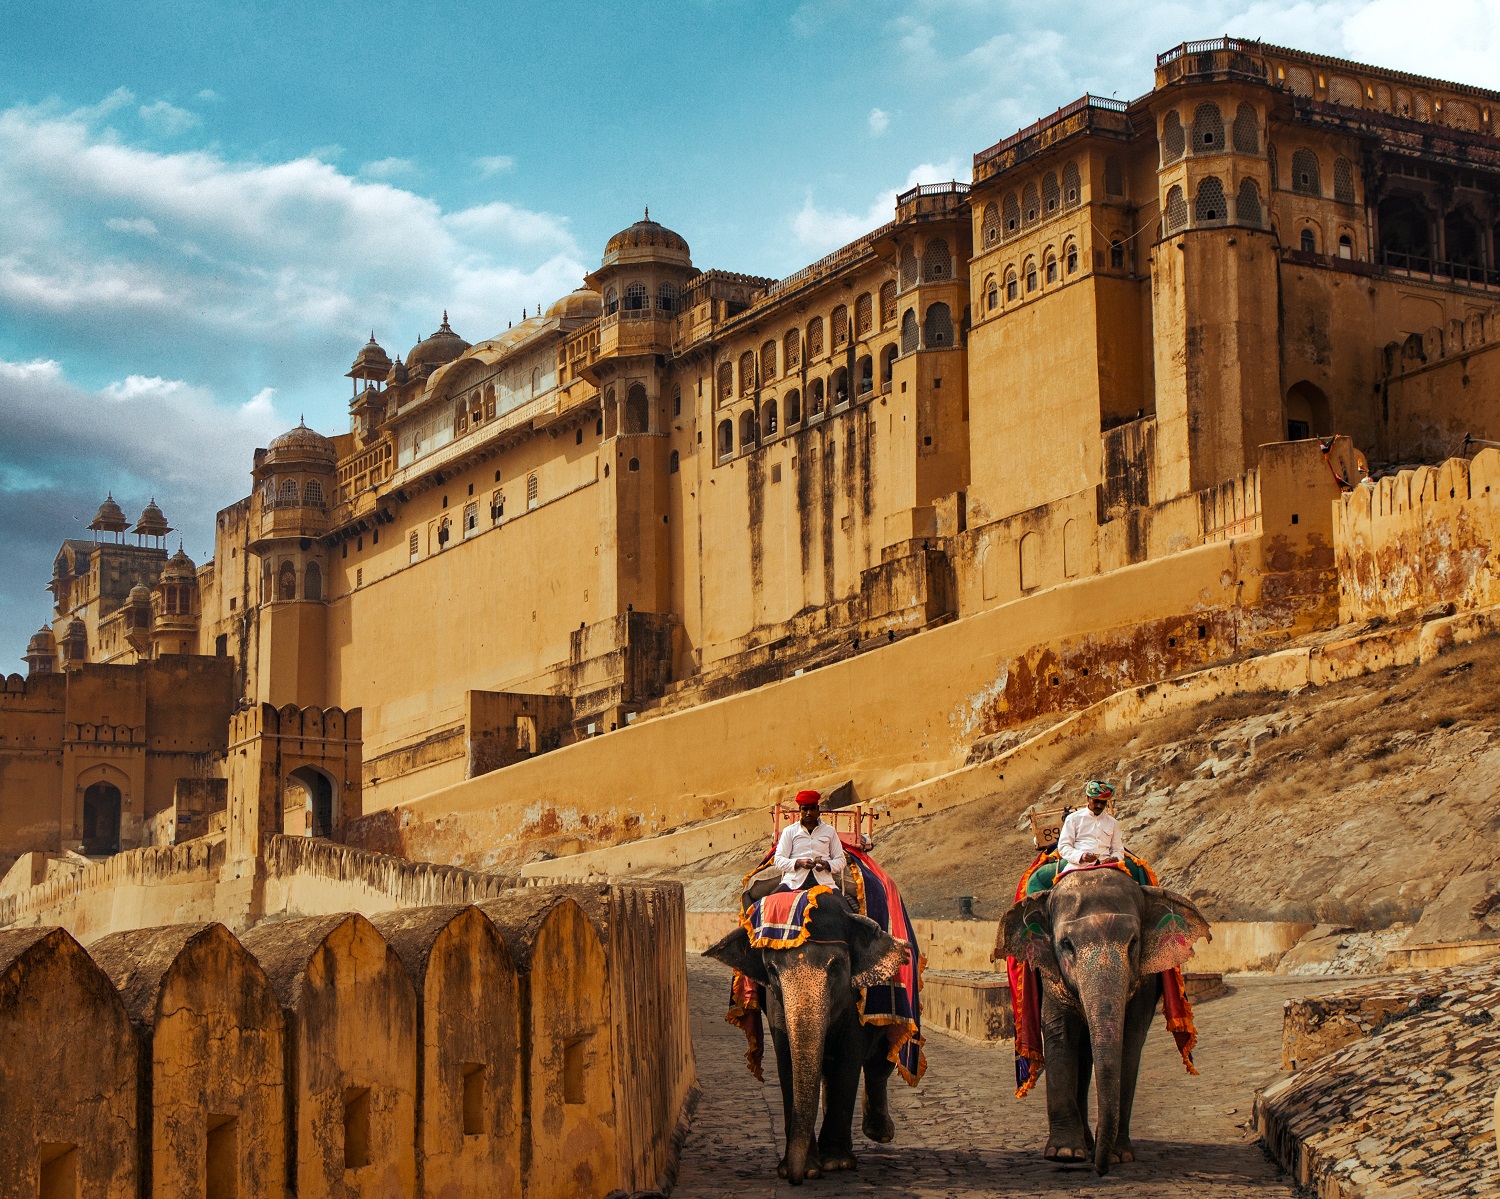 Amazing Facts about Amer Fort of Jaipur You Probably Didn’t Know